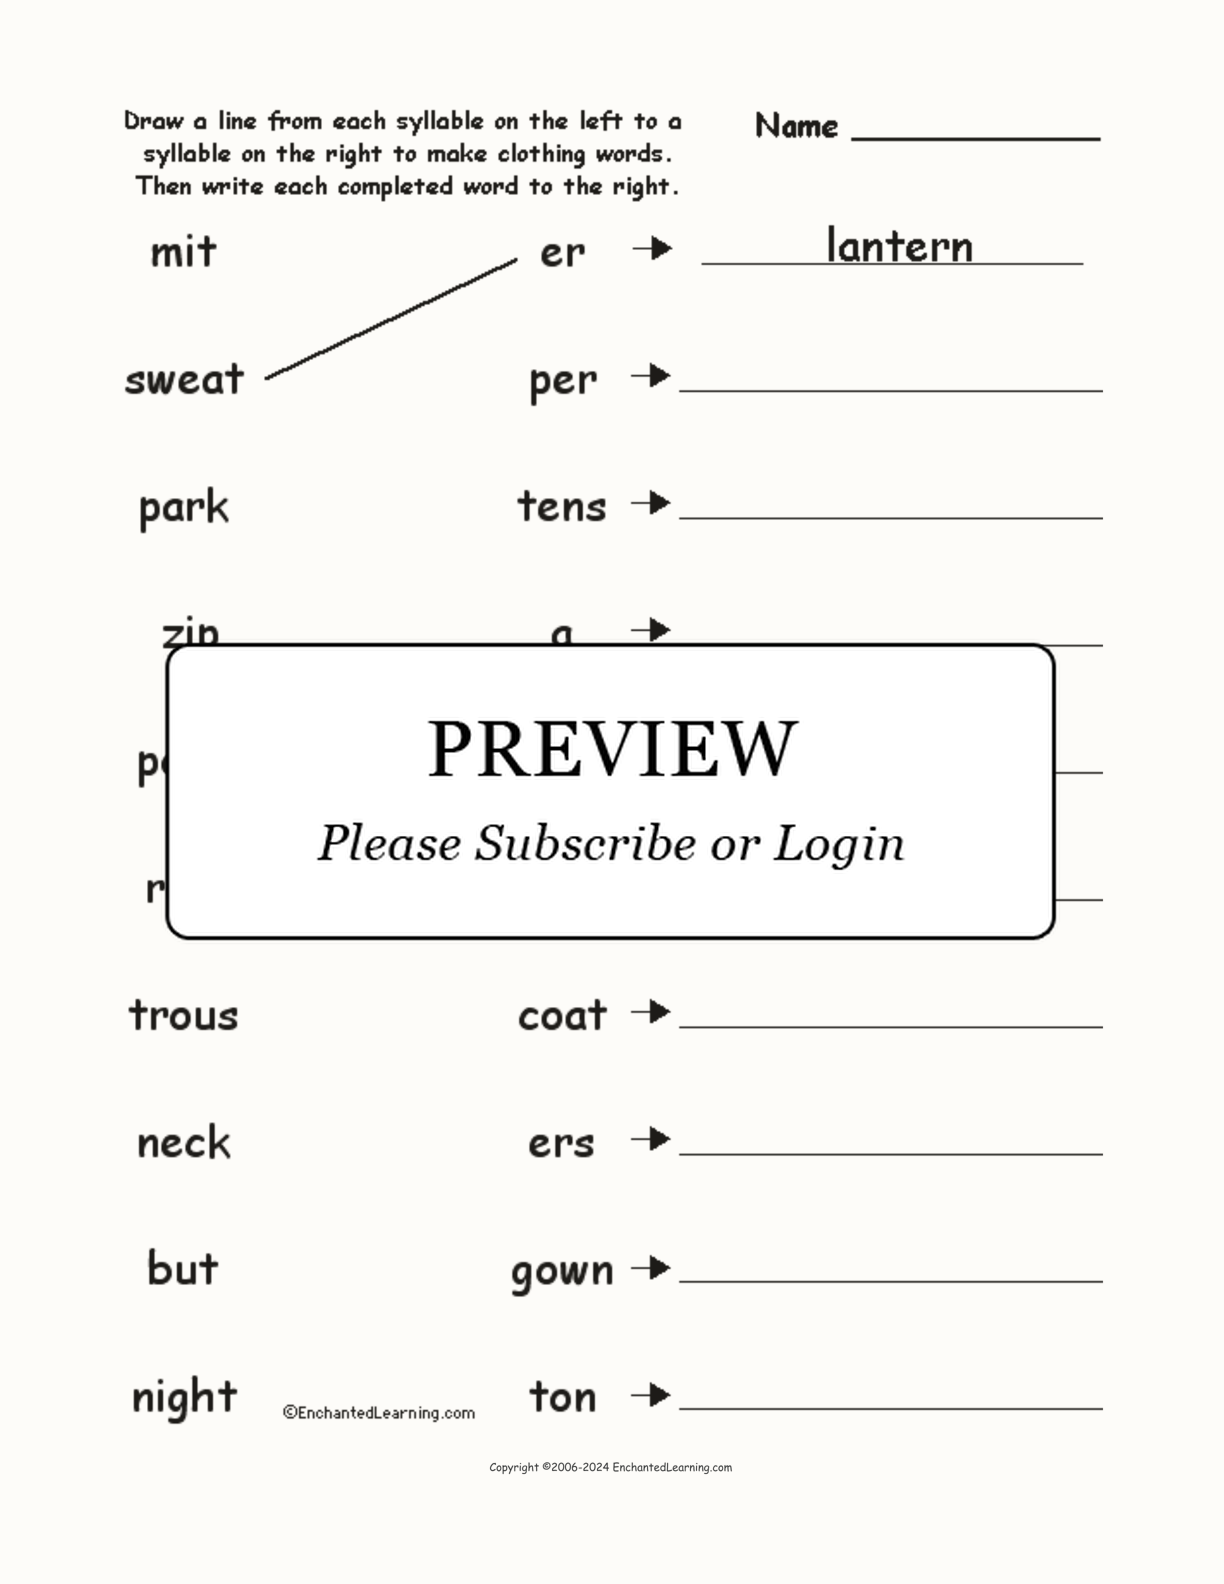 Match the Syllables: Clothing Words interactive worksheet page 1